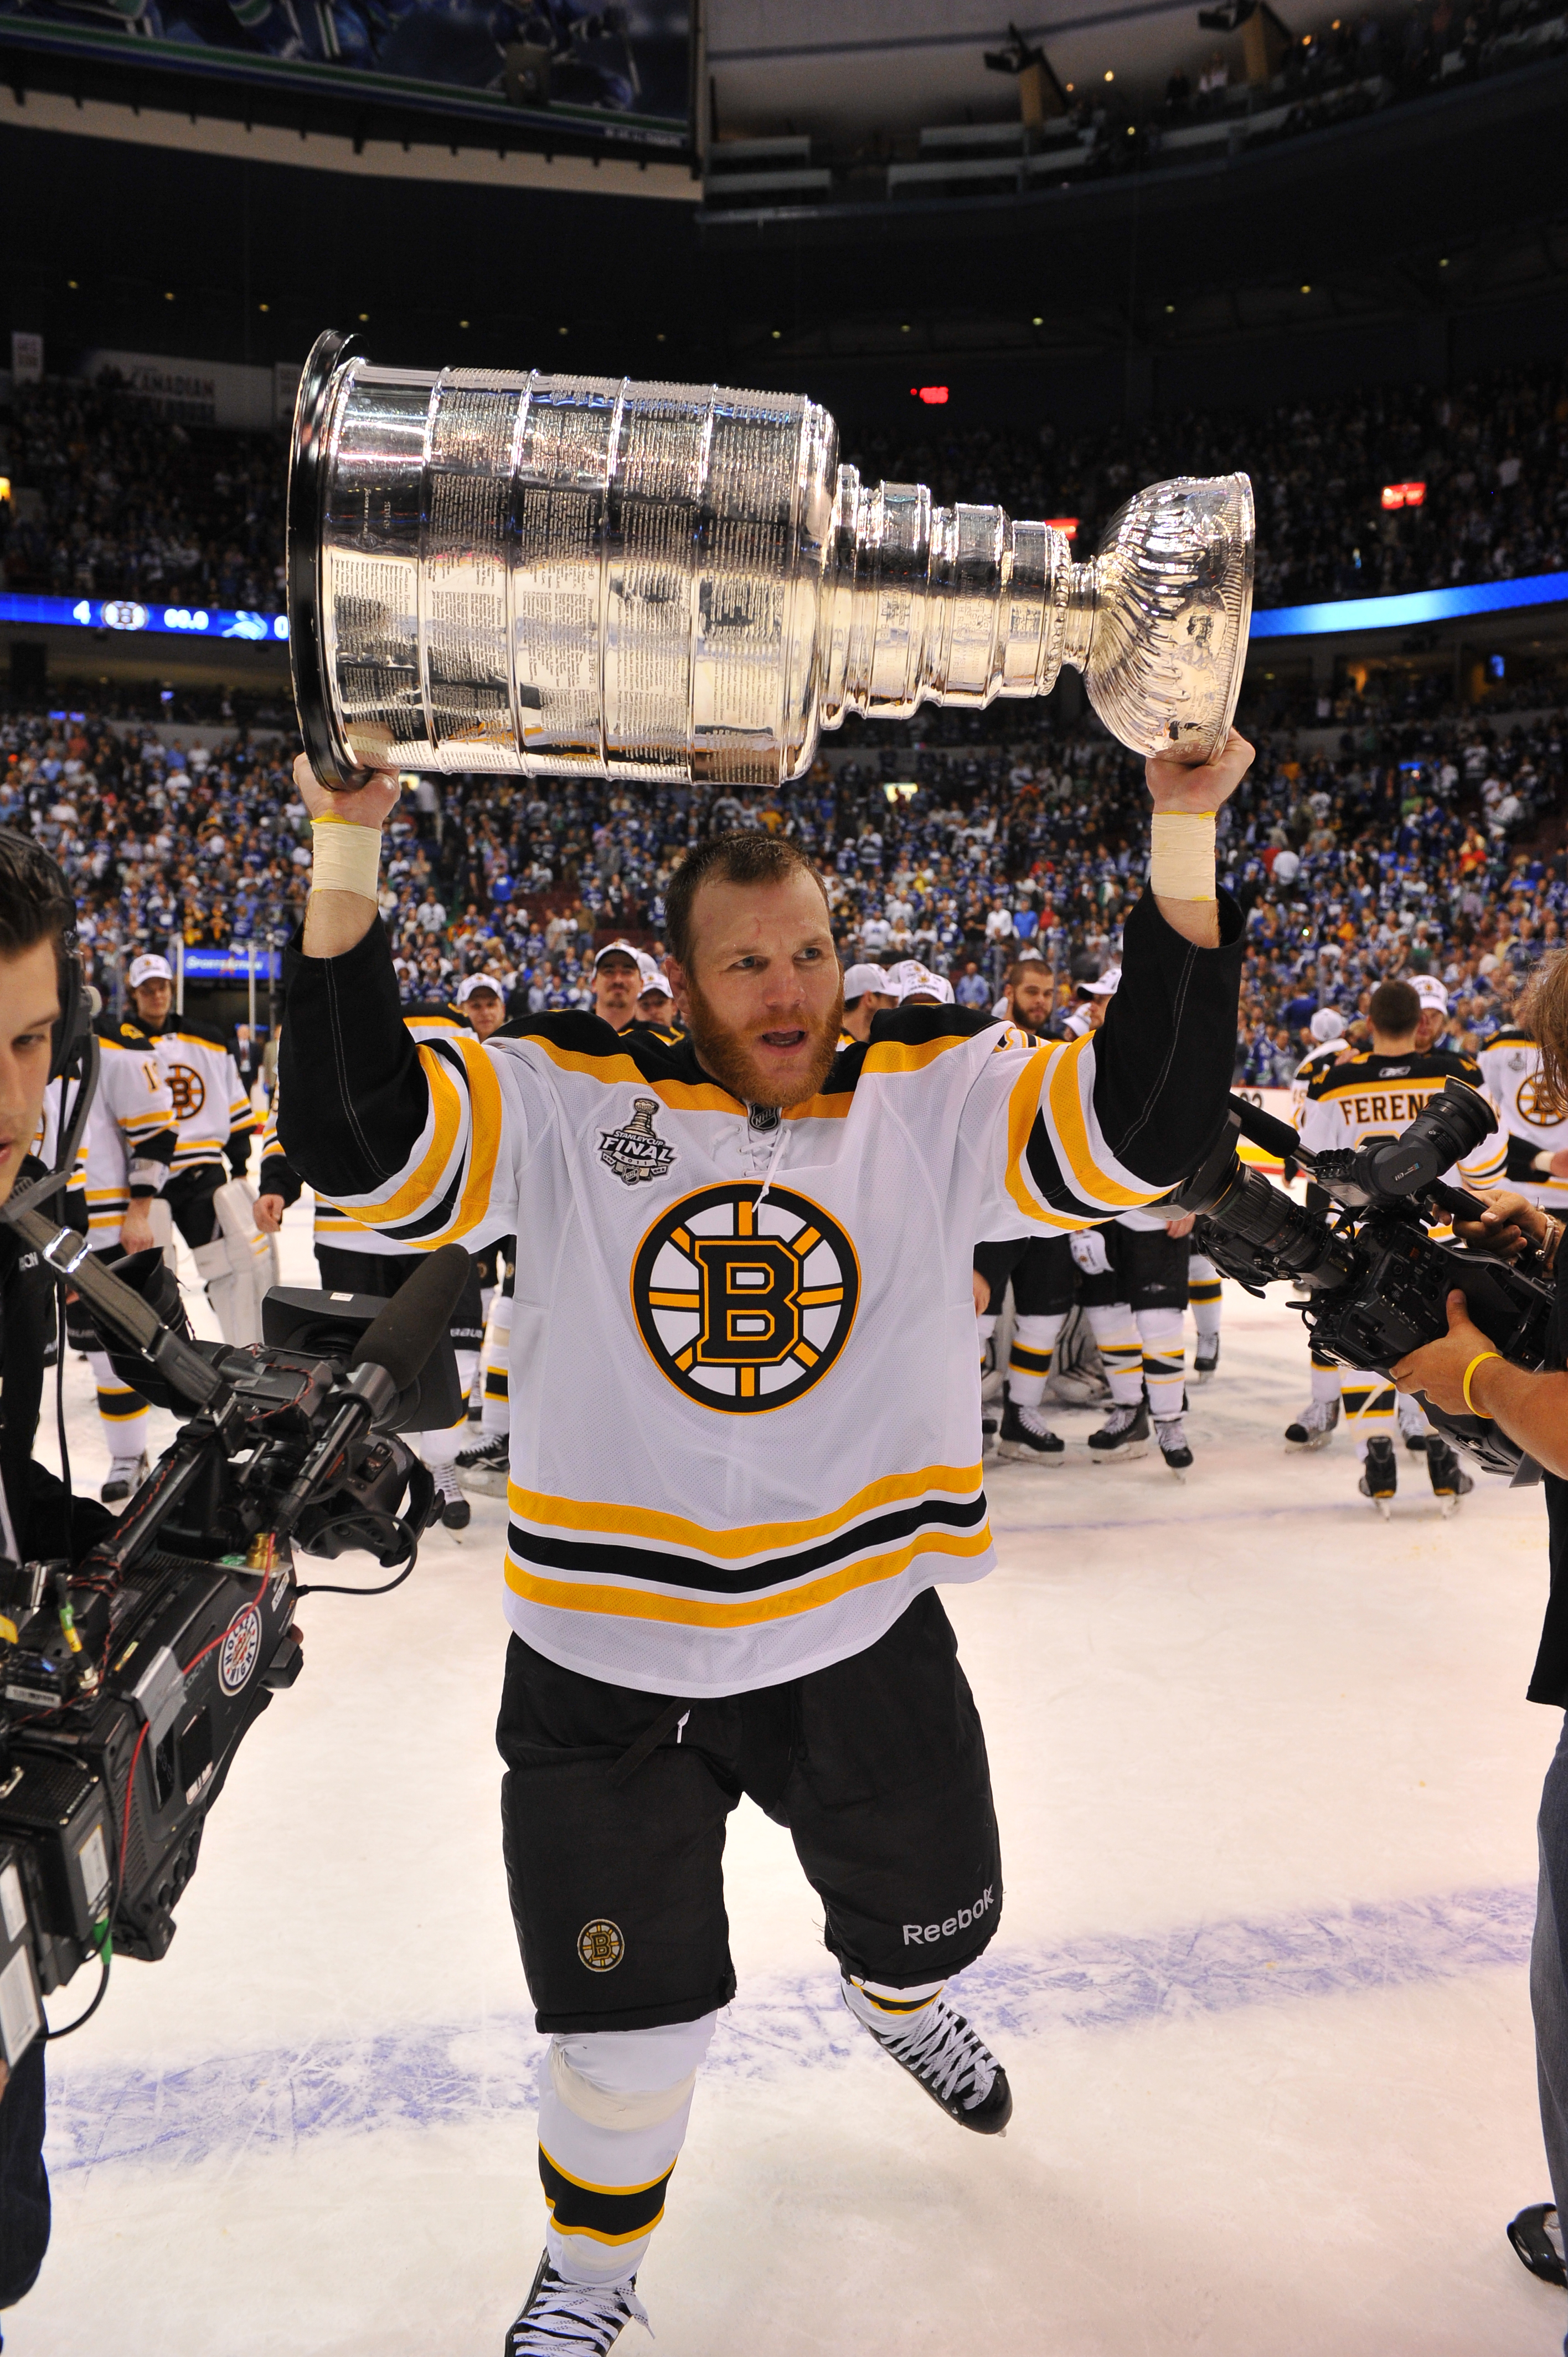 shawn thornton and the stanley cup